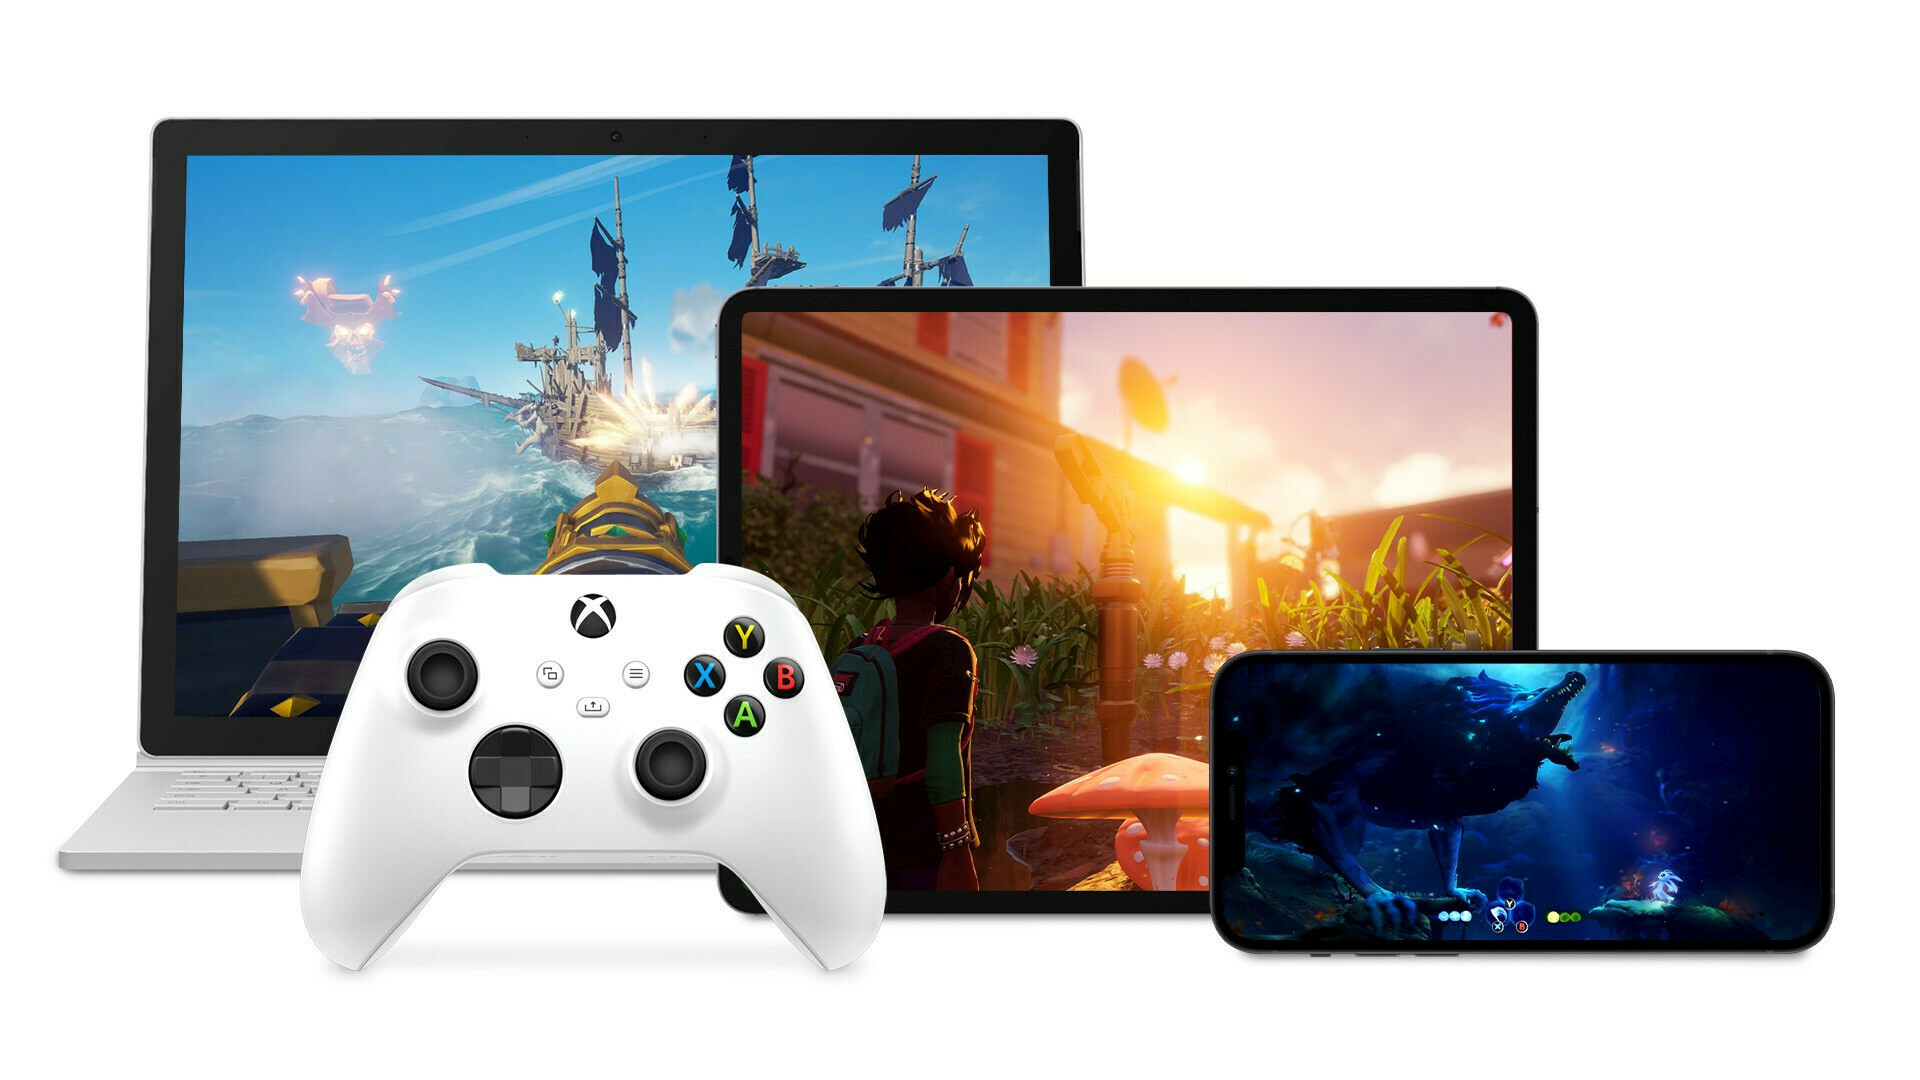 Xbox cloud gaming: everything you need to know